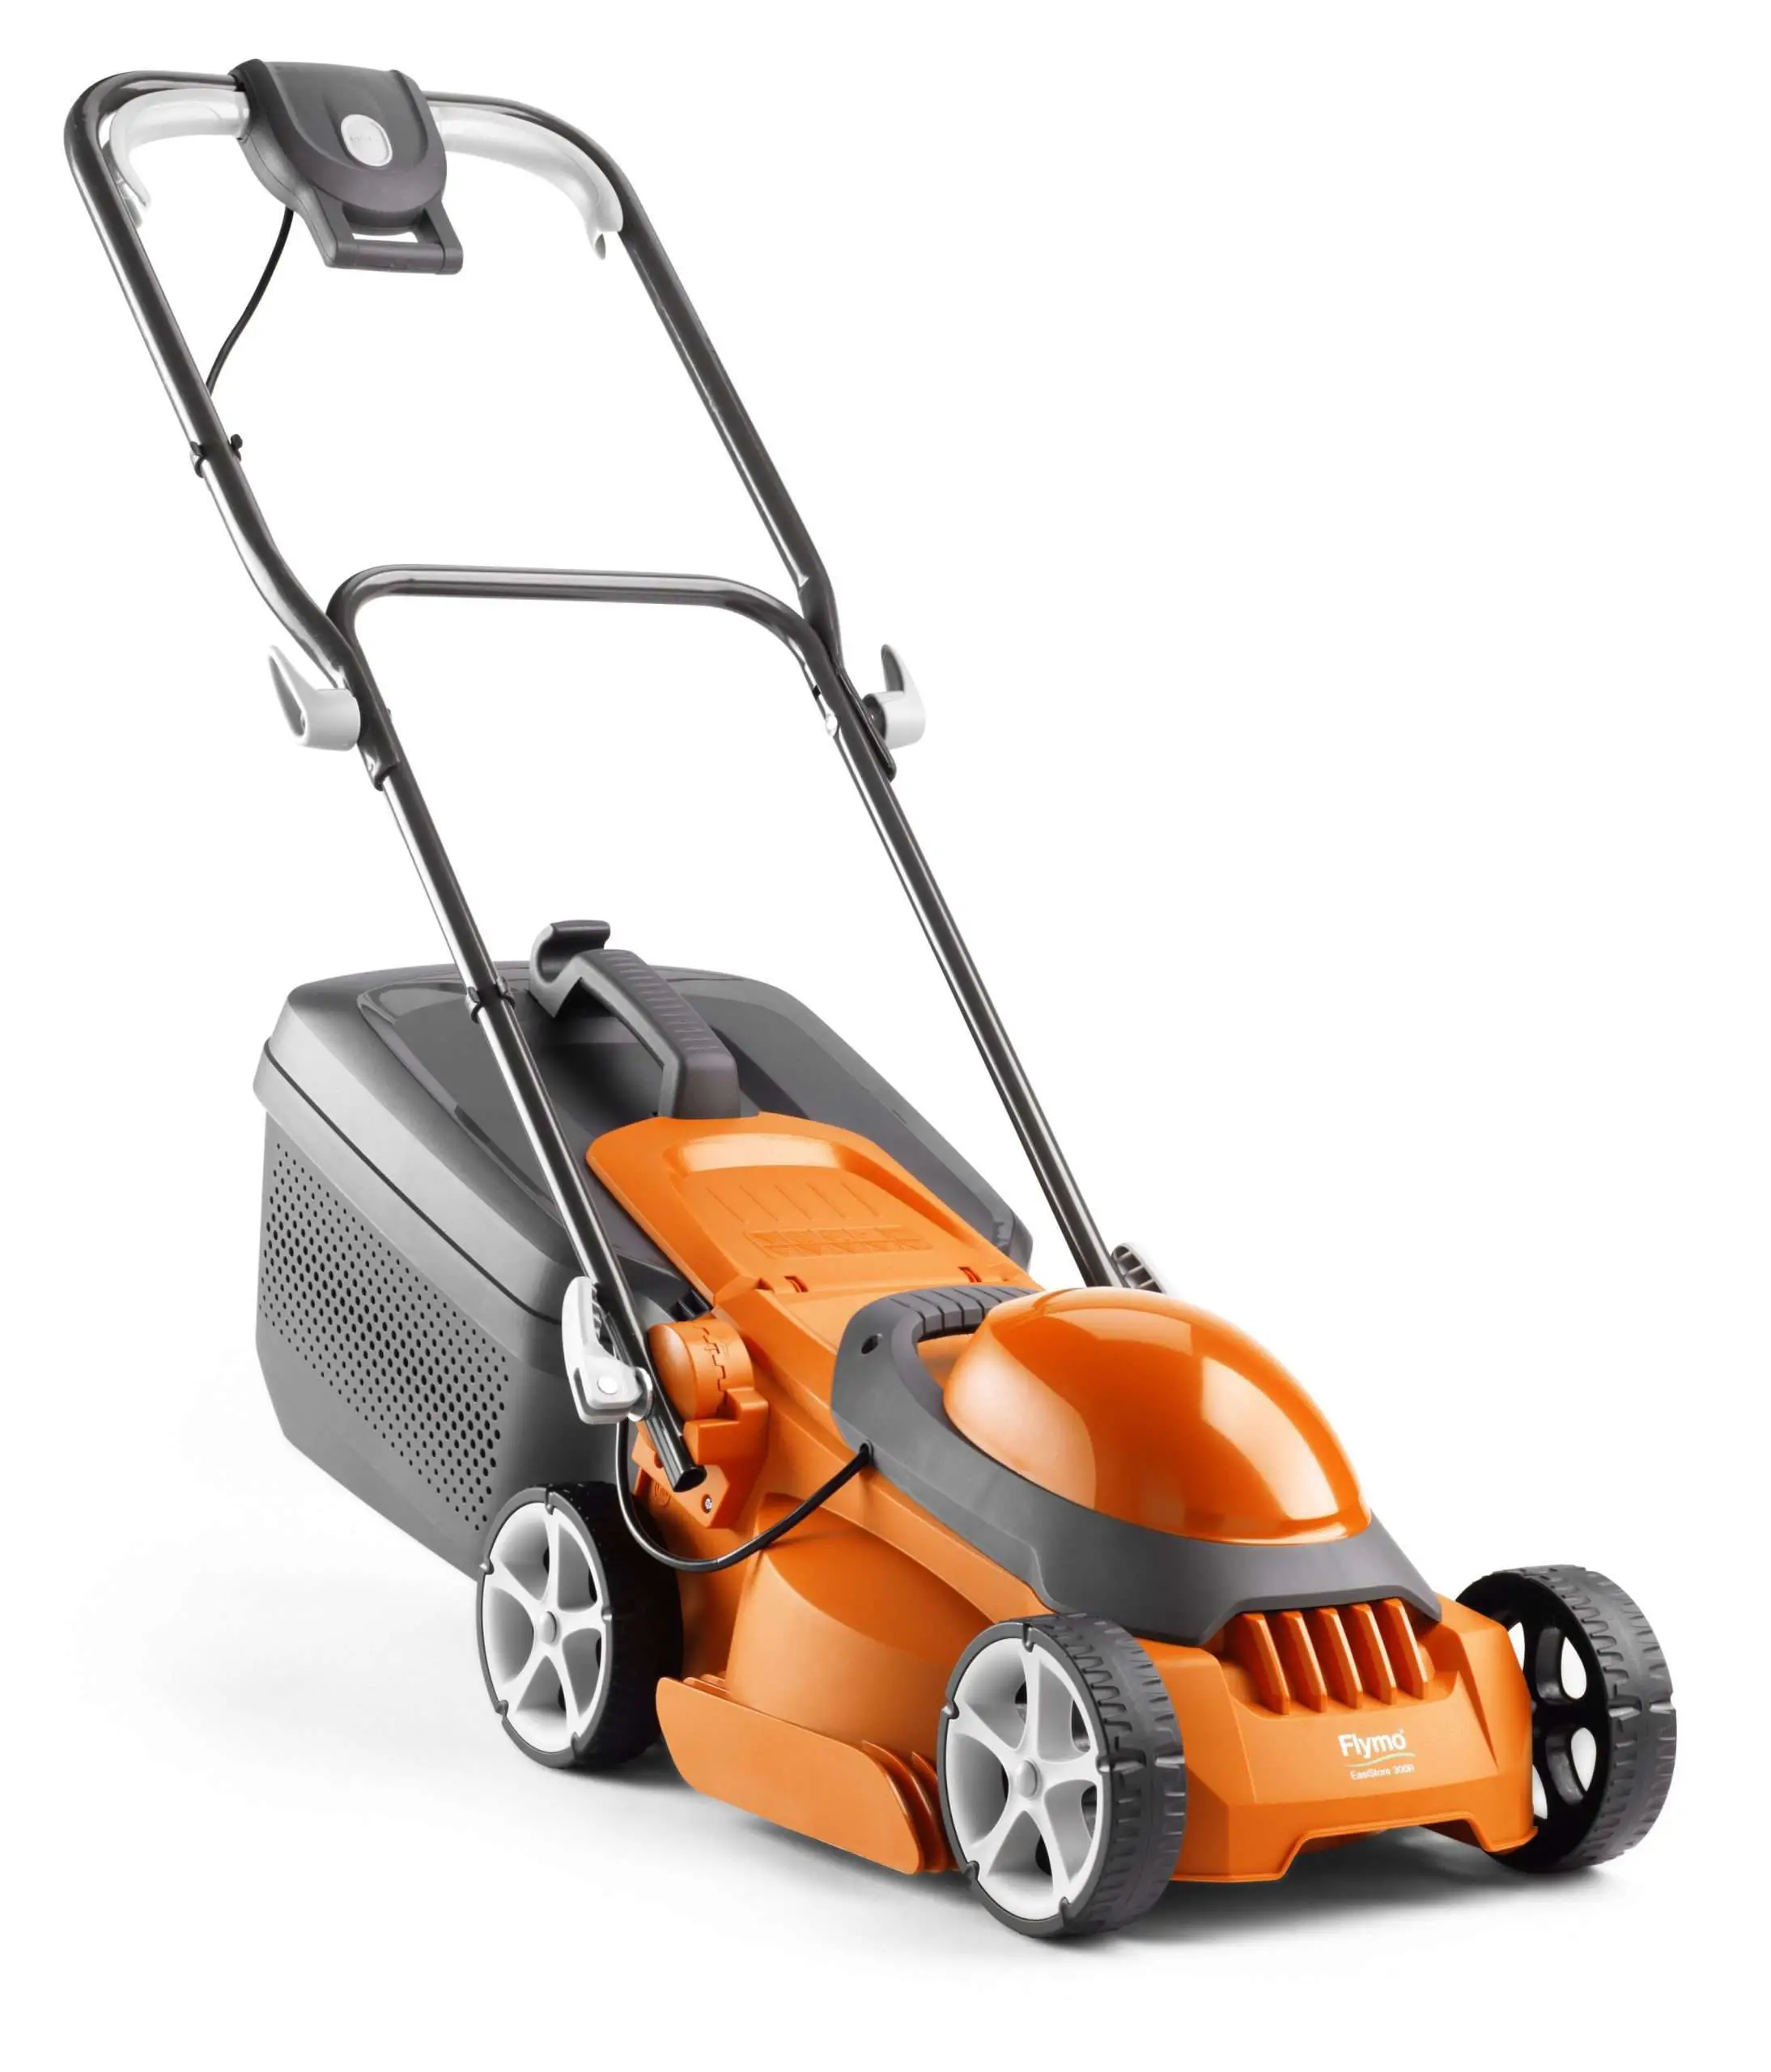 Flymo Easi Store Electric Rotary Lawn Mower At Low Price